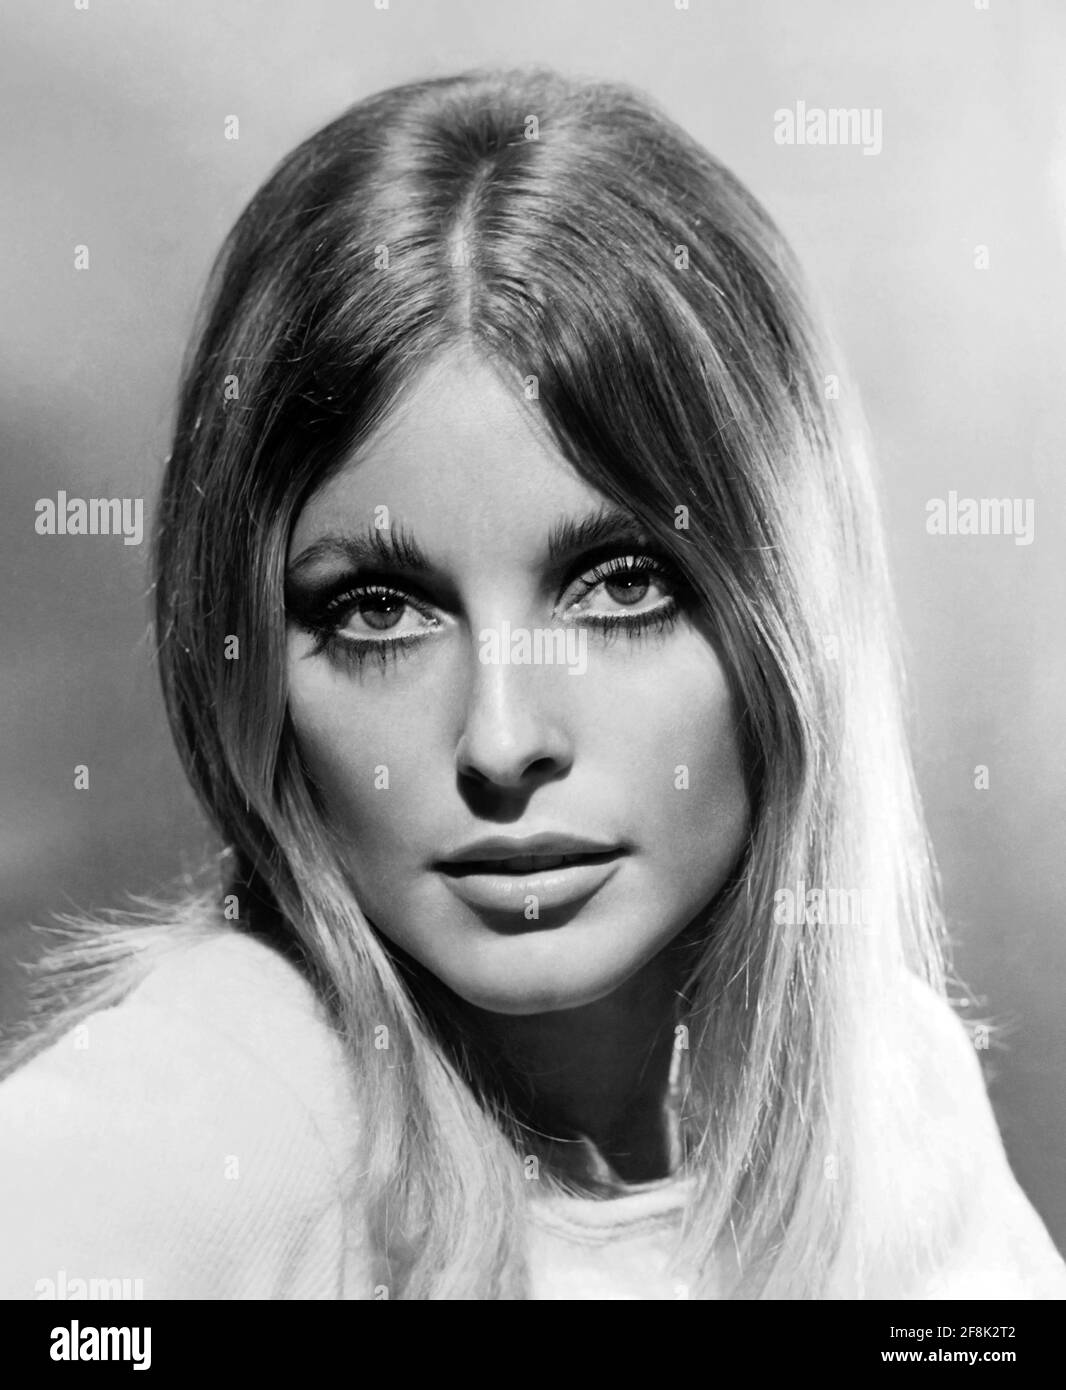 Sharon Tate. Portrait of the American actress, Sharon Marie Tate Polanski (1943-1969), publicity still from the film 'Valley of the Dolls', 1967 Stock Photo